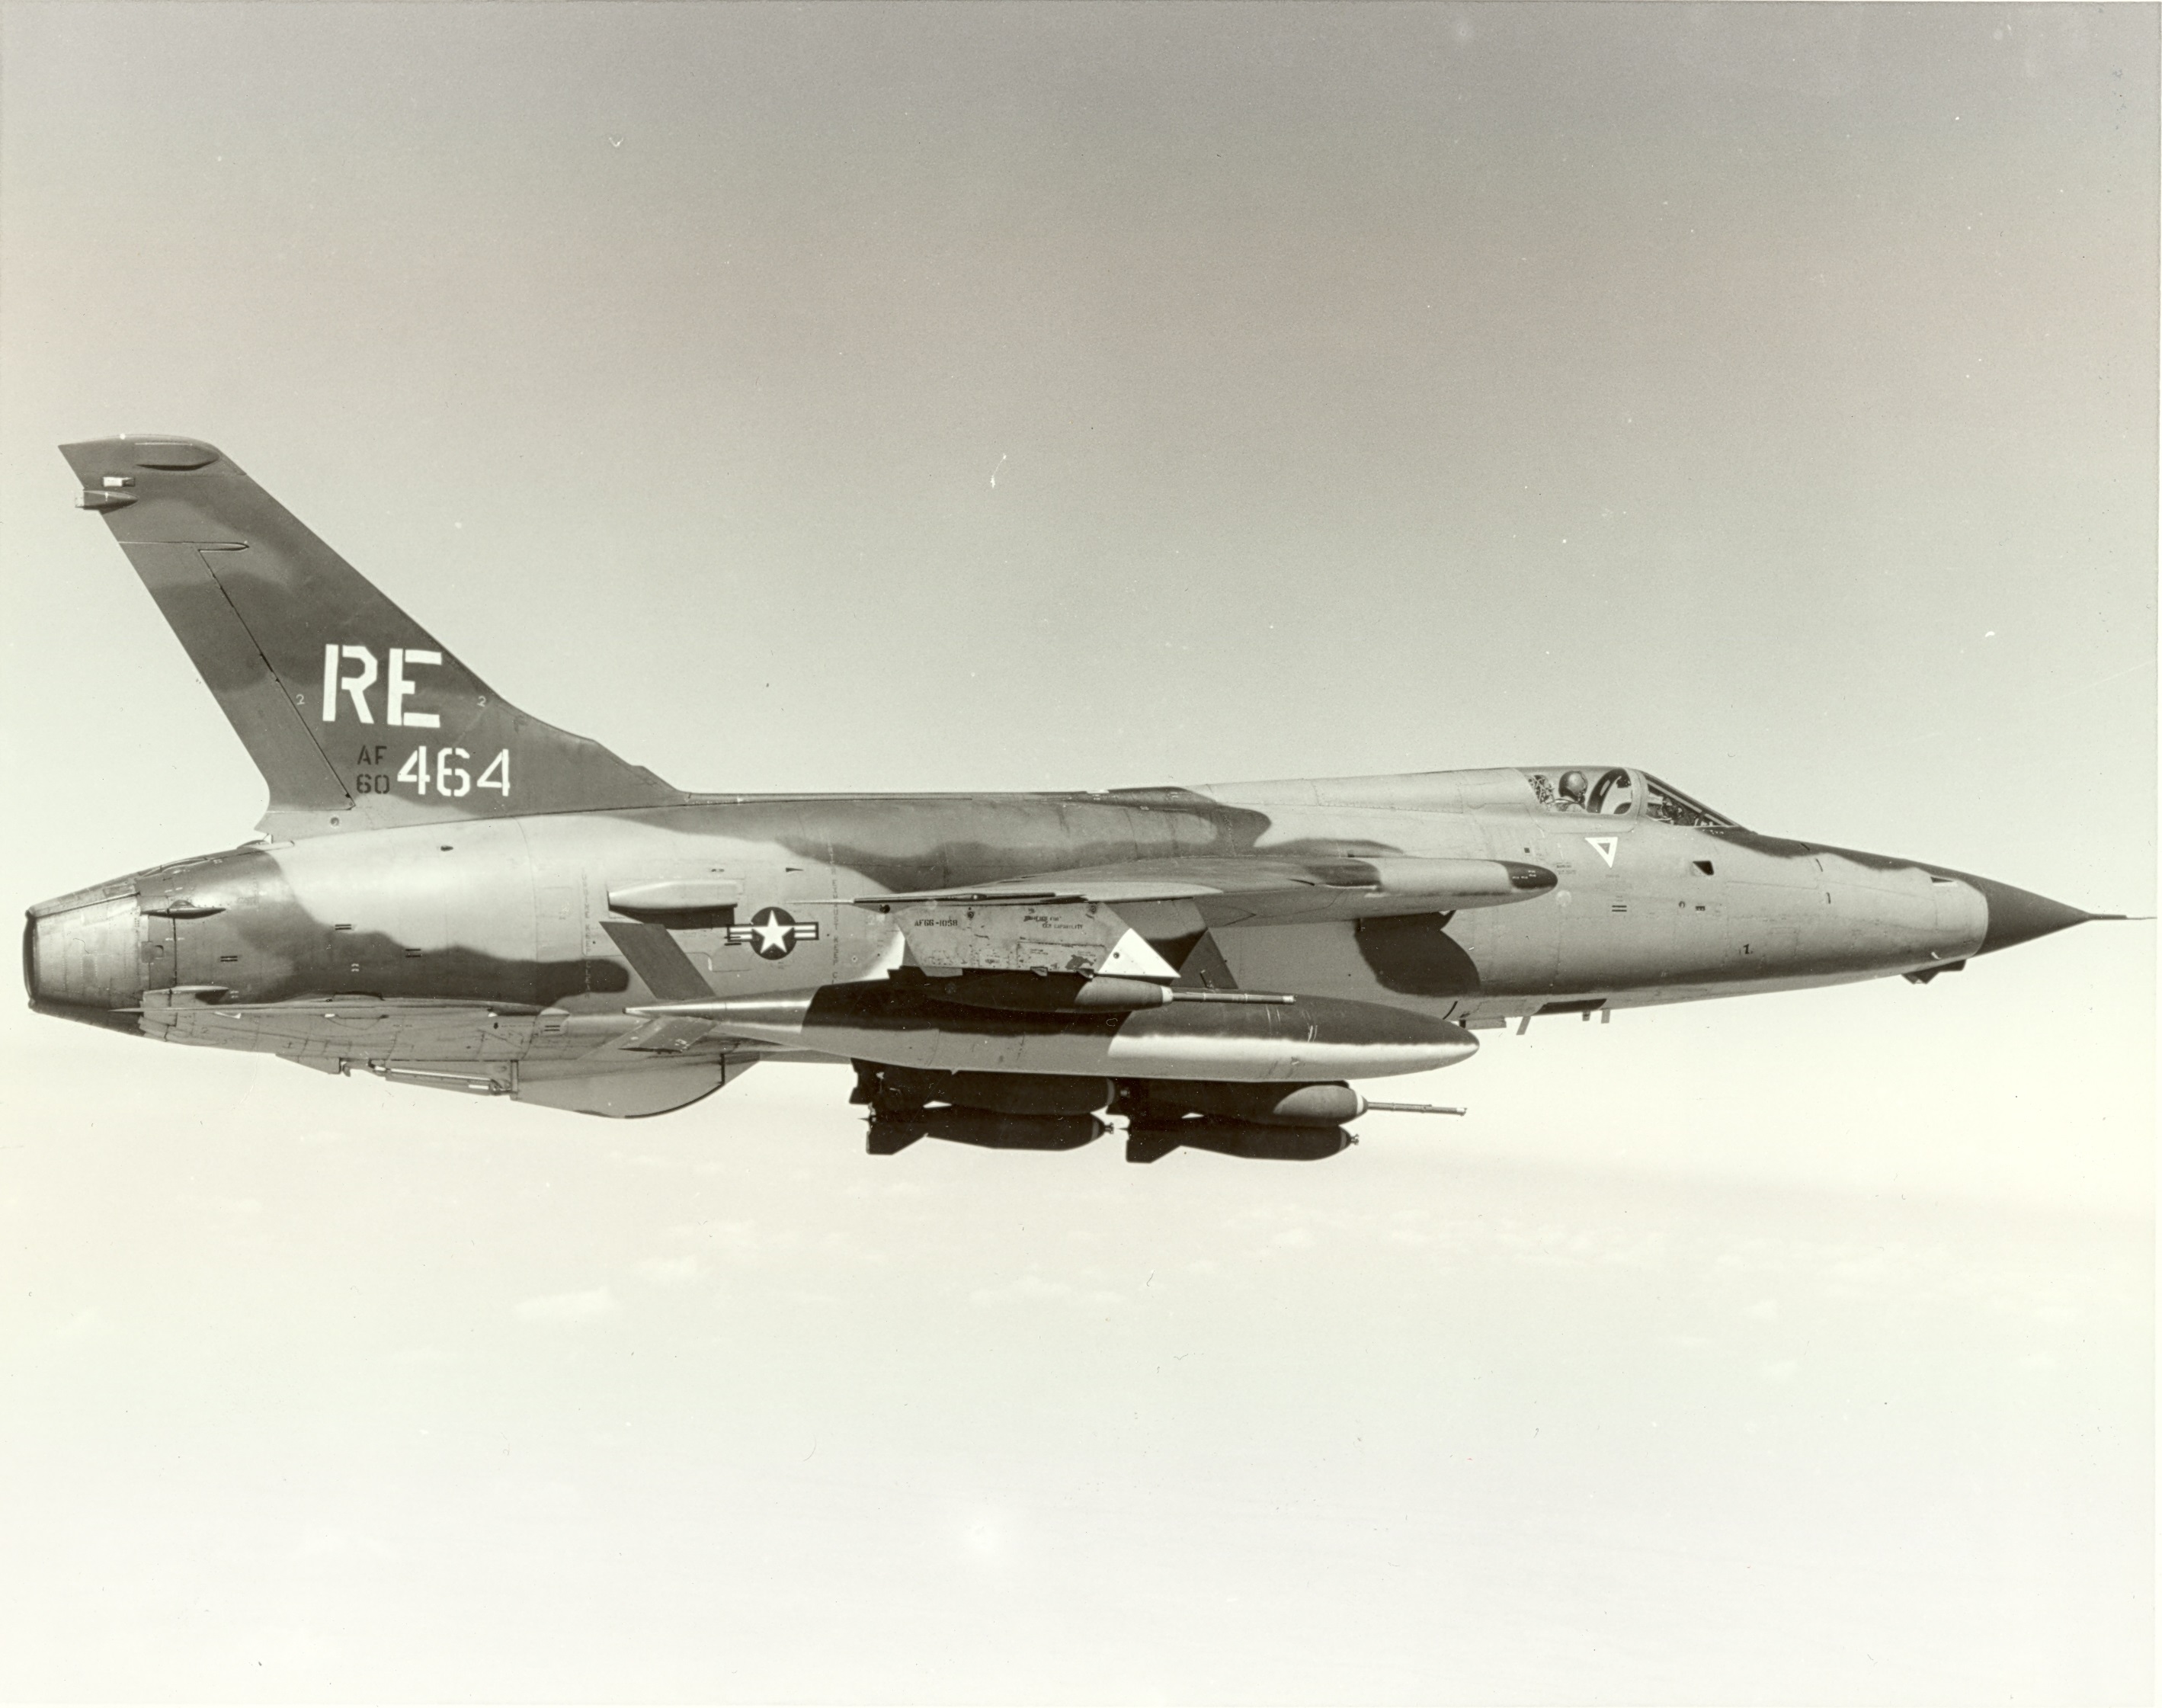 Republic F-105D-10-RE Thunderchief 60-0464, 355th Tactical Fighter Wing, Takhli RTAFB. (U.S. Air Force)